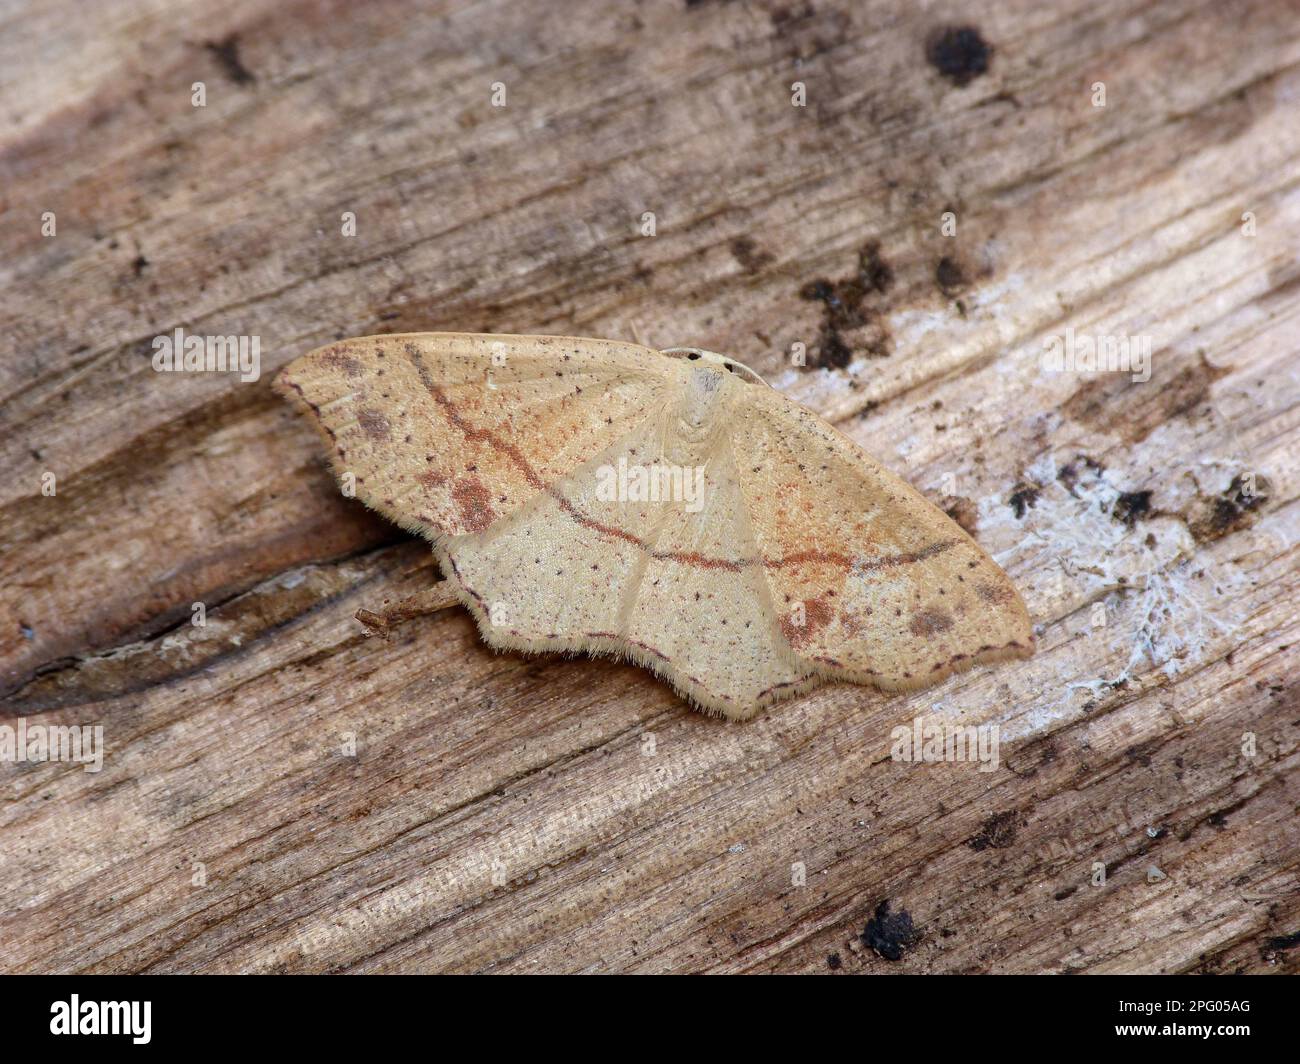 Dotted oak girdle moth (Cyclophora punctaria), Grey girdle moth, Insects, Moths, Butterflies, Animals, Other animals, Maiden's blush adult male, res Stock Photo